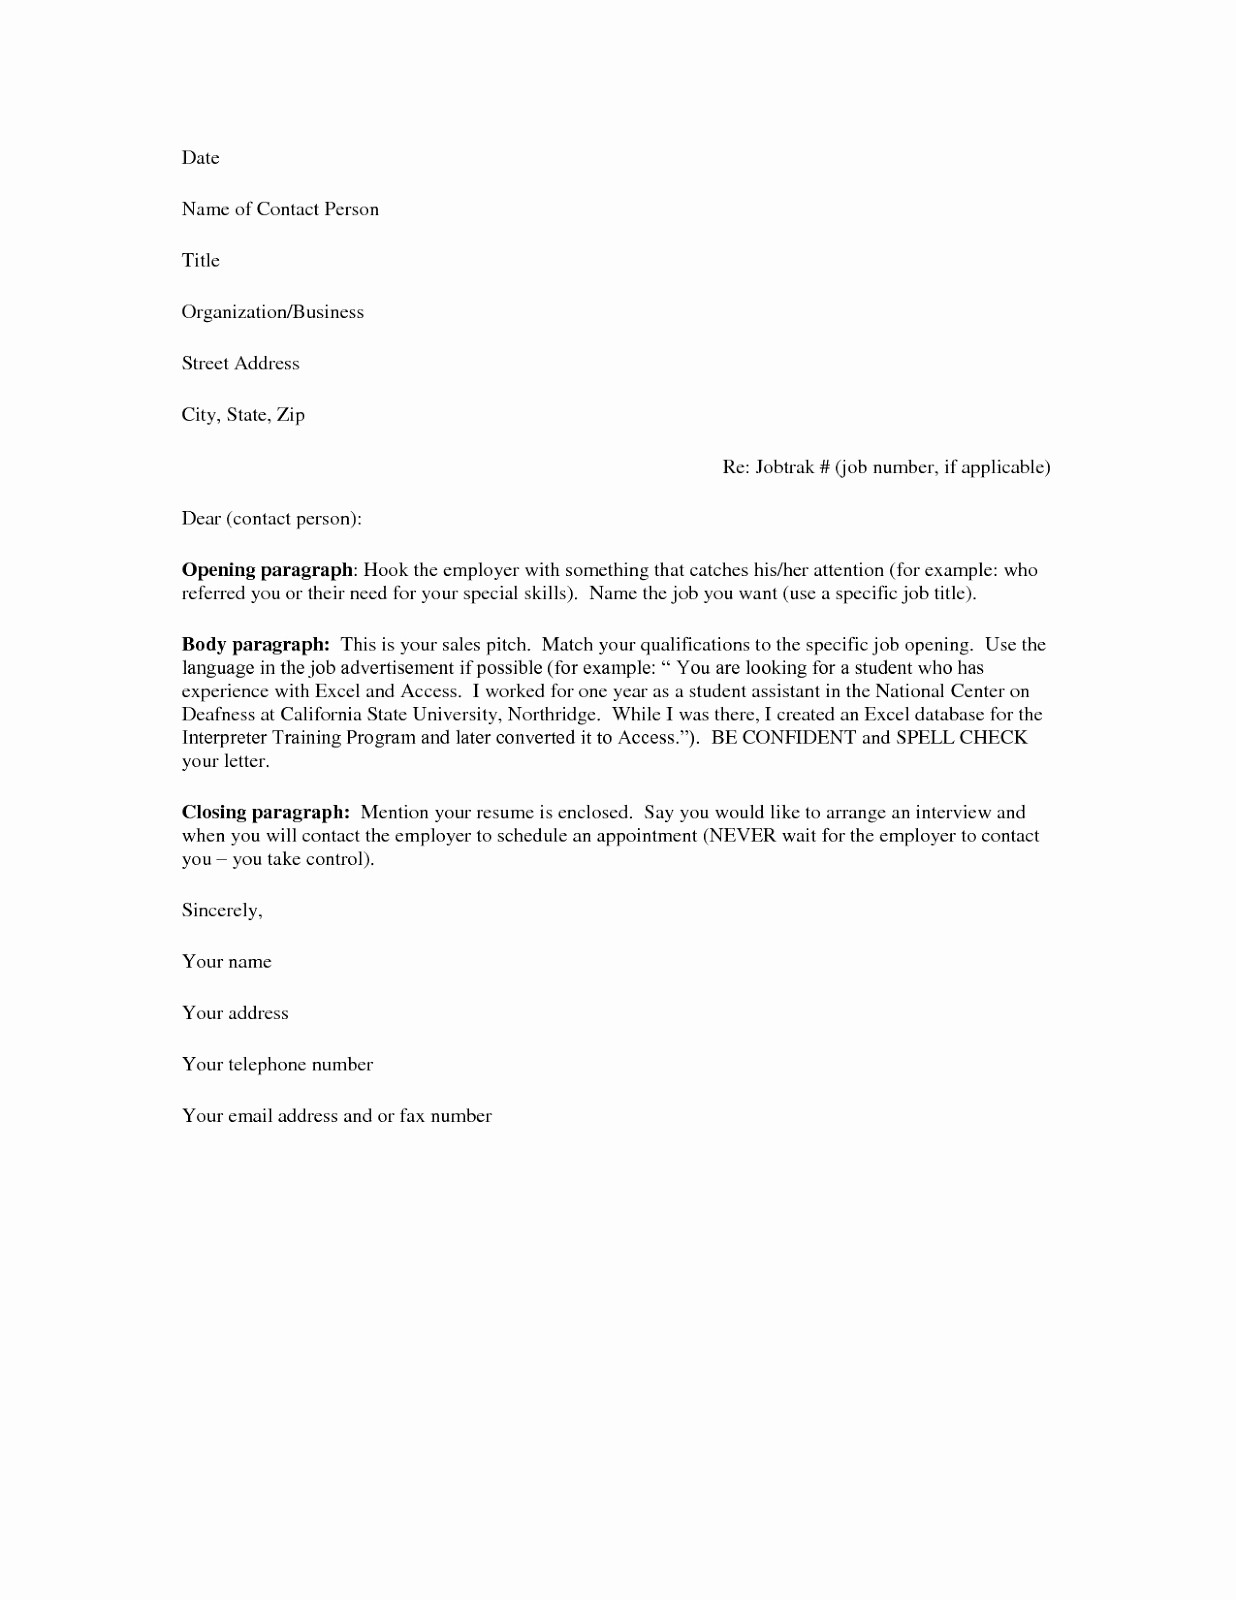 Resume Cover Letter Template Free Luxury Free Cover Letter Samples for Resumes